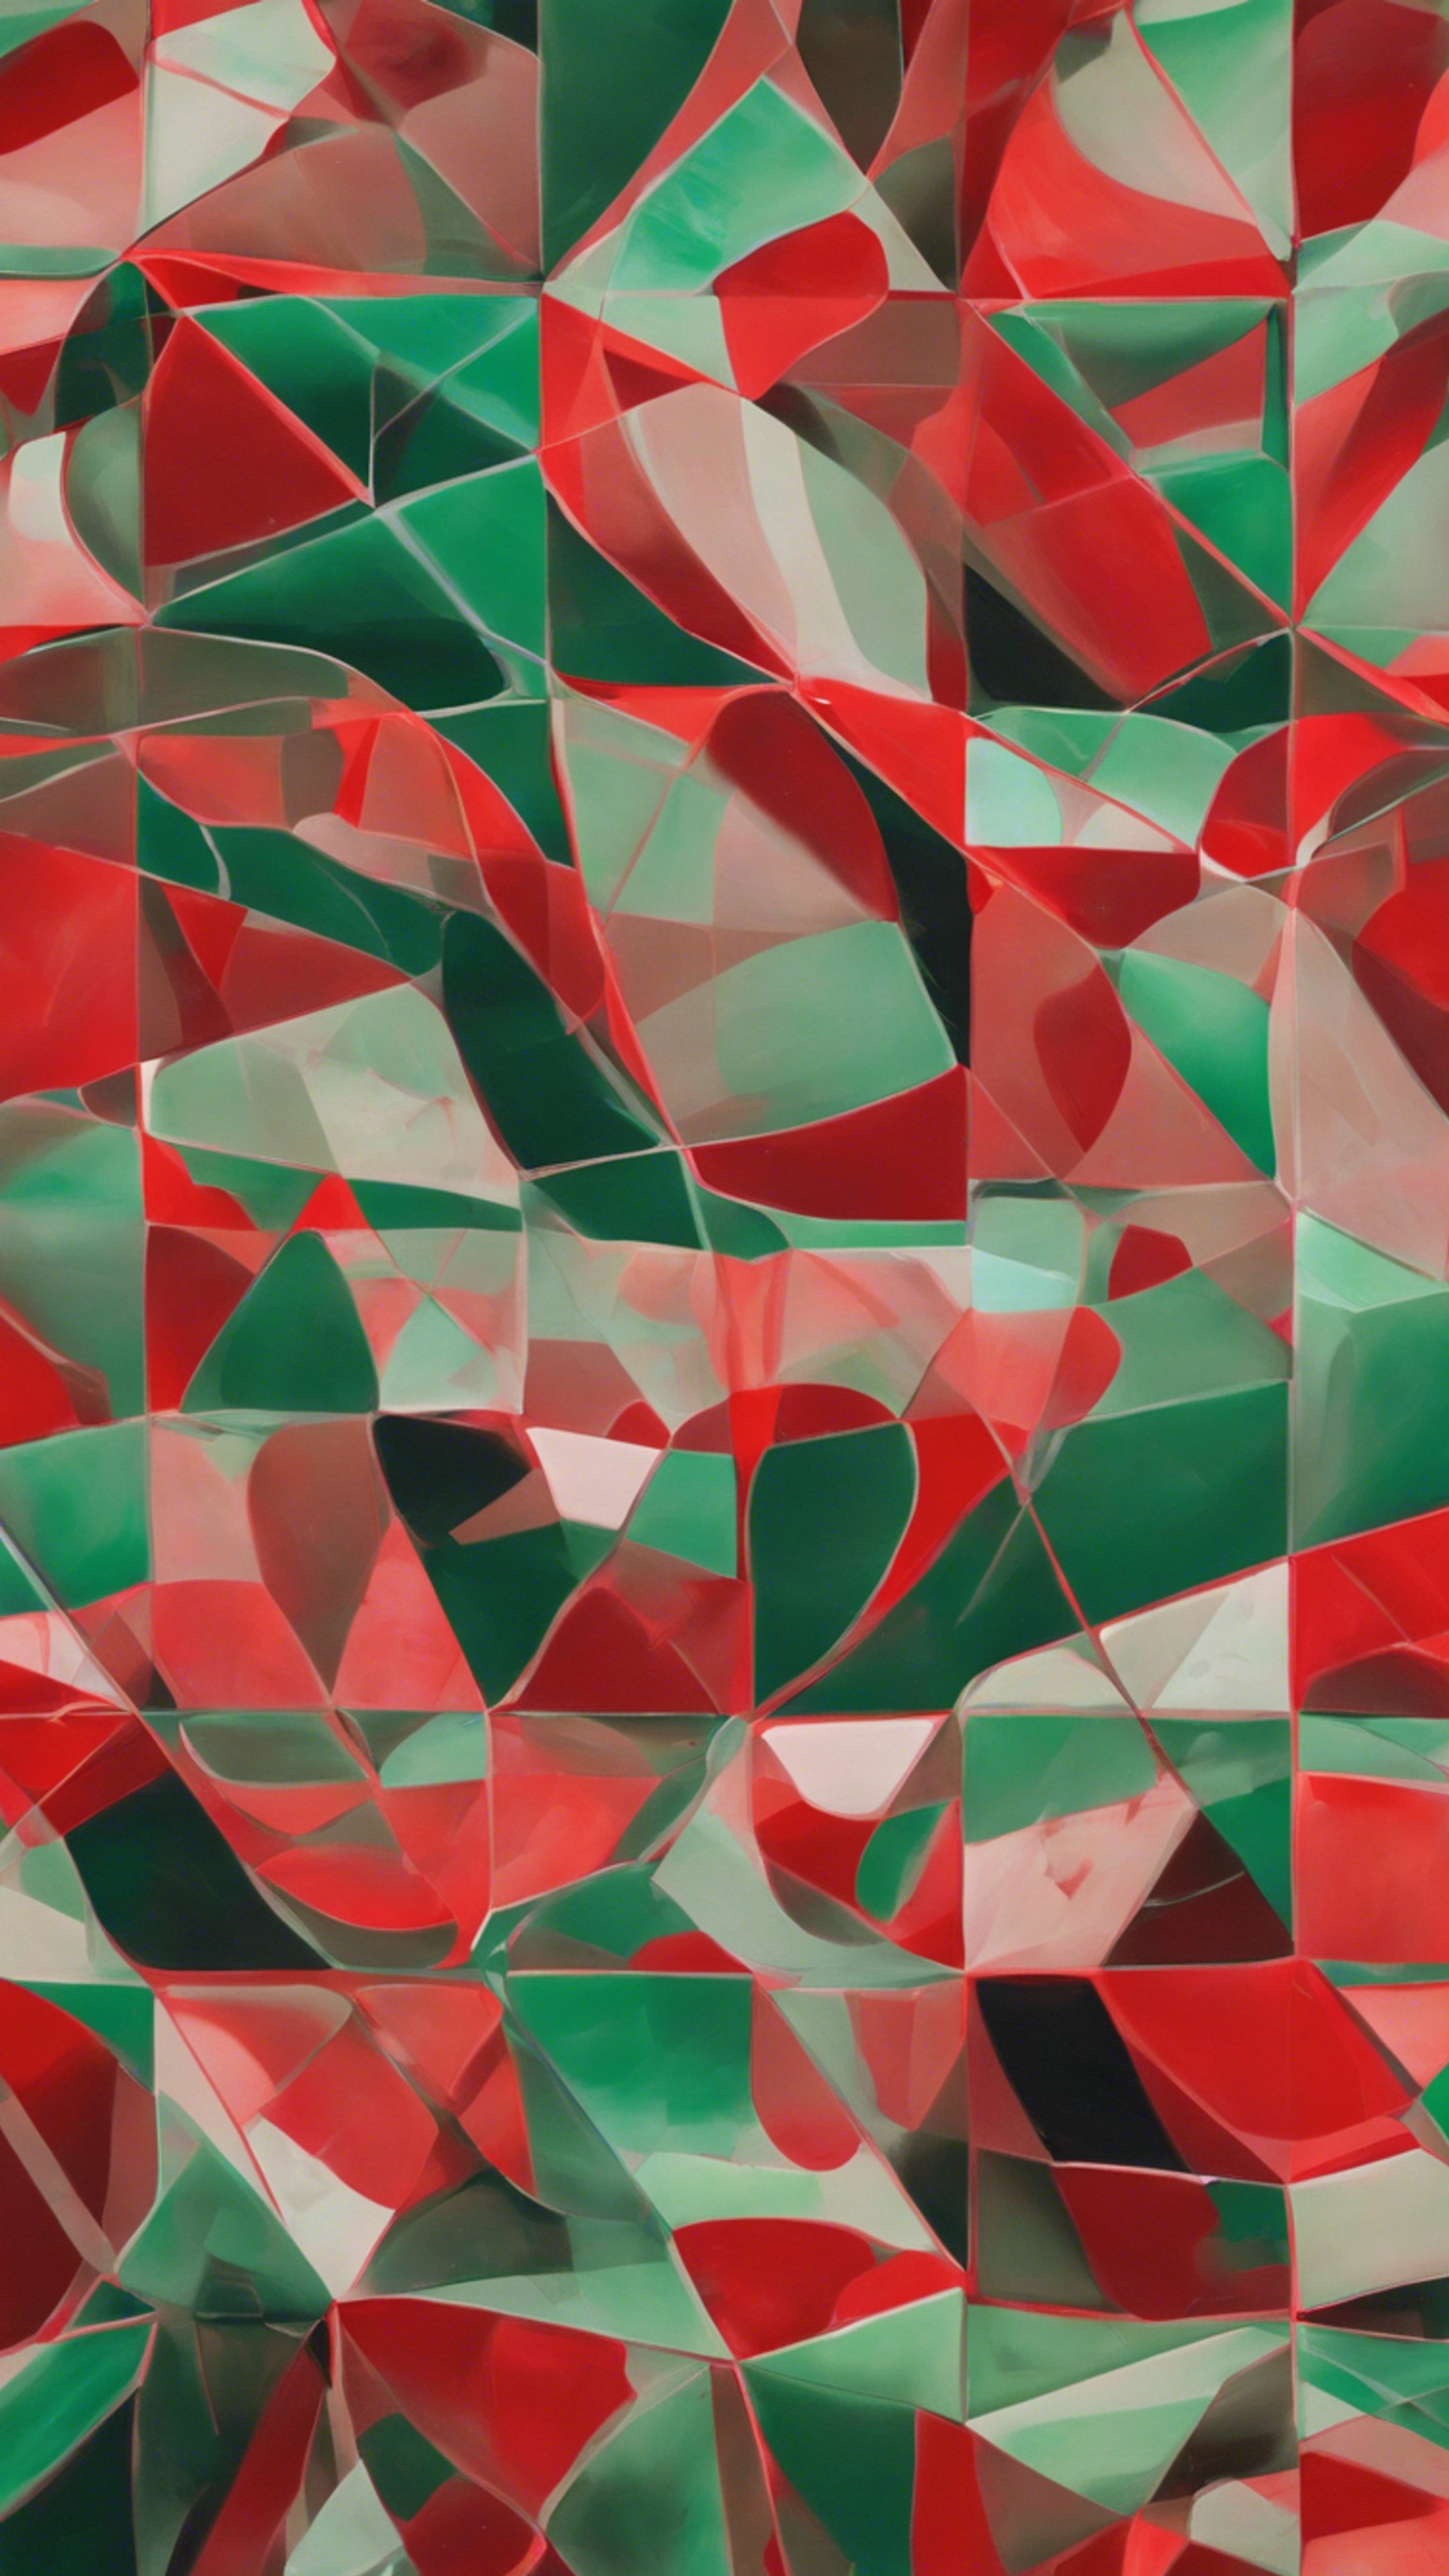 A modernist painting of red and green geometrical shapes, seamless in their connection Tapeta[cfa3acf637214e6a9239]